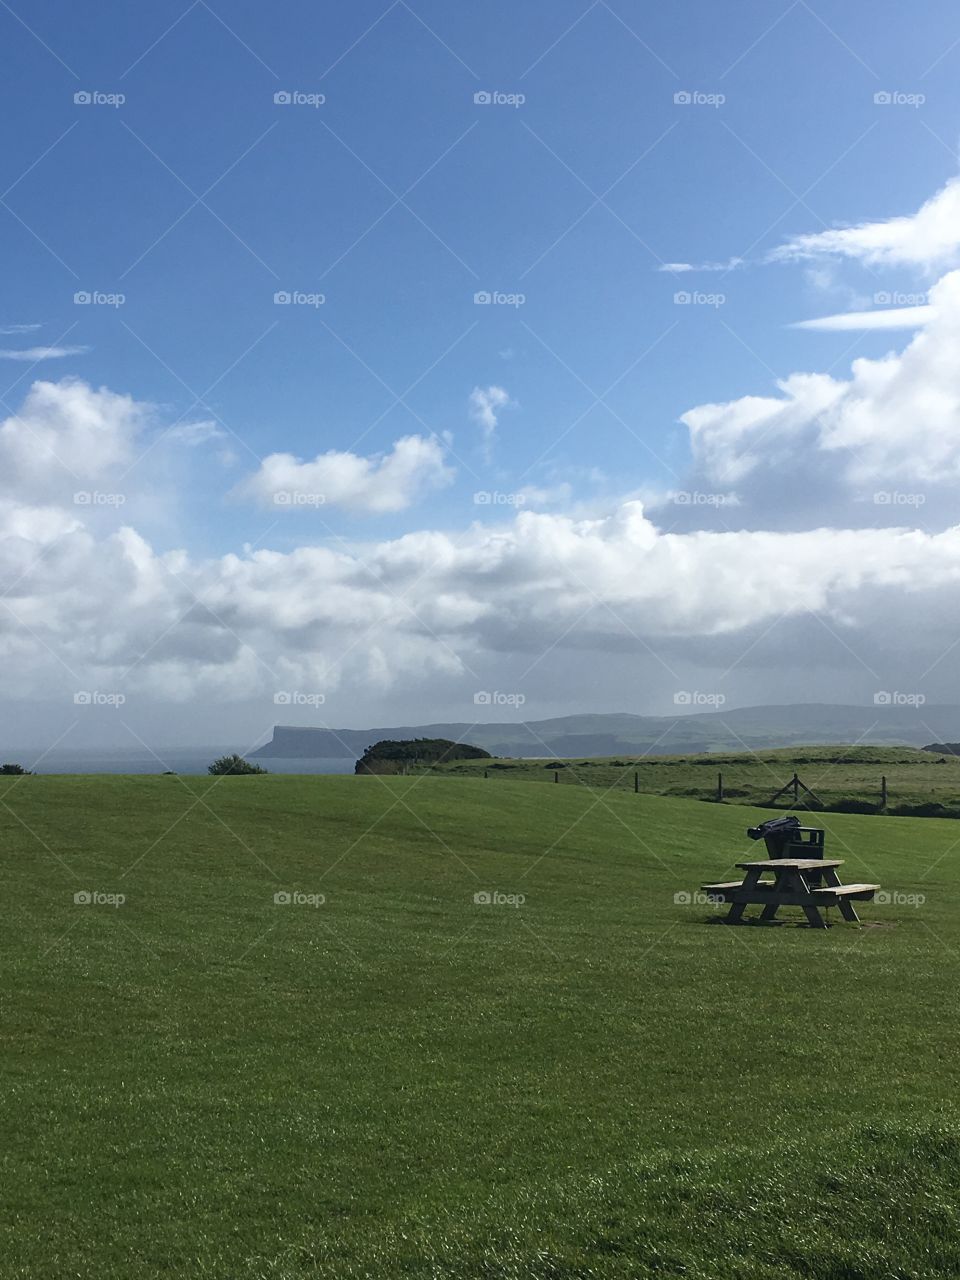 A large, empty field in Ireland with the ocean and cliffs in the background. And there’s one line bench in the middle of the field 